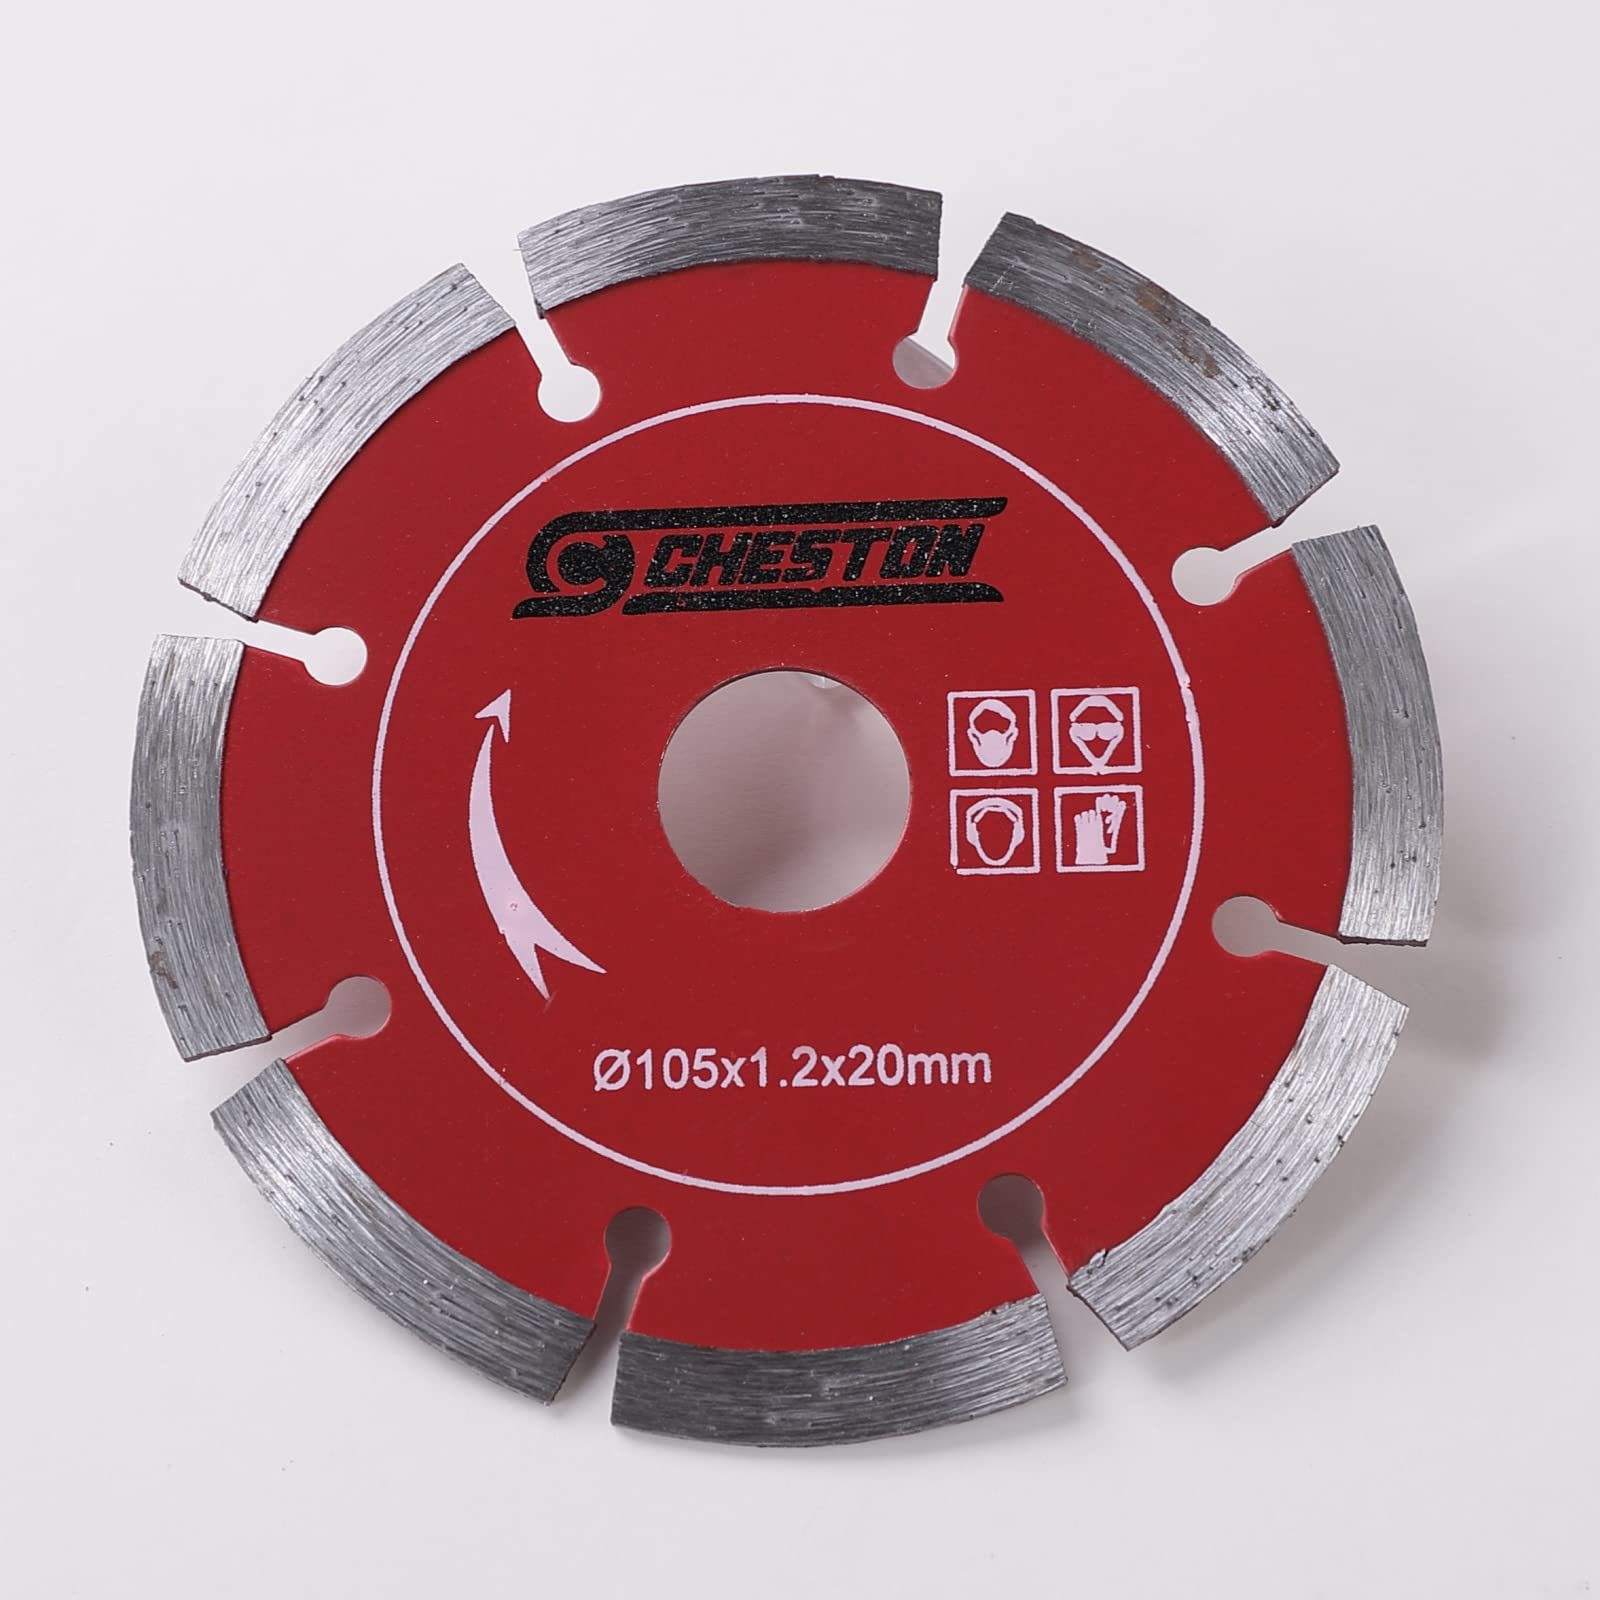 Cheston Cutting Blade 4 Inch Pack of 5 I Diamond Saw Blade Cutting Wheel I Sharp Cutter for Iron, Granite, Marble and Other Metal Cutting I Compatible with Bosch, Black+Decker, Ibell Angle Grinder (100mm/4inch)